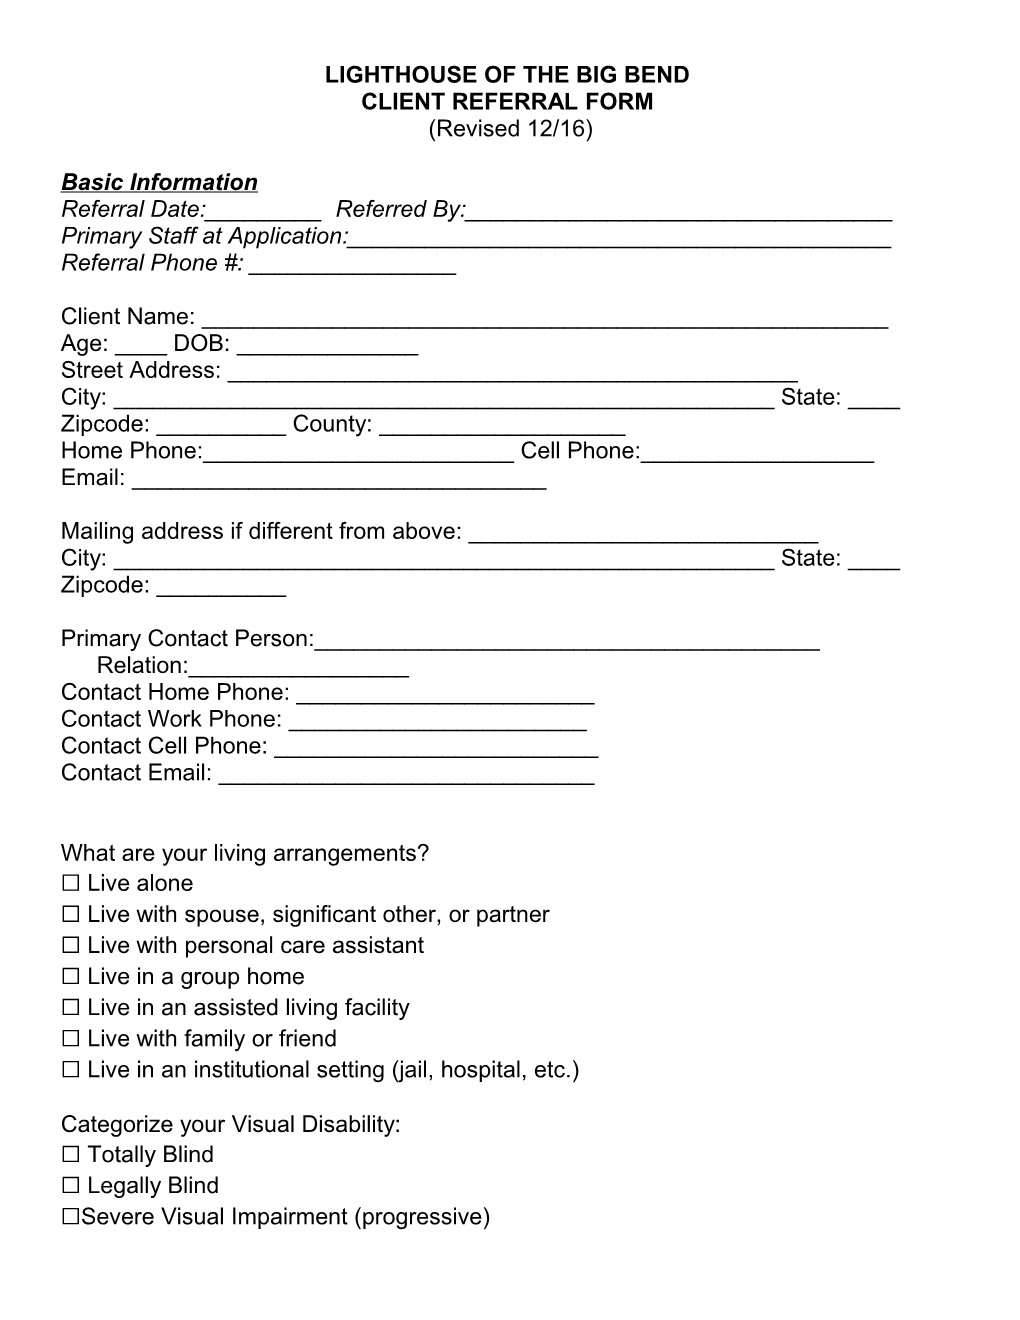 Client Referral Form (Revised 7/25/01)